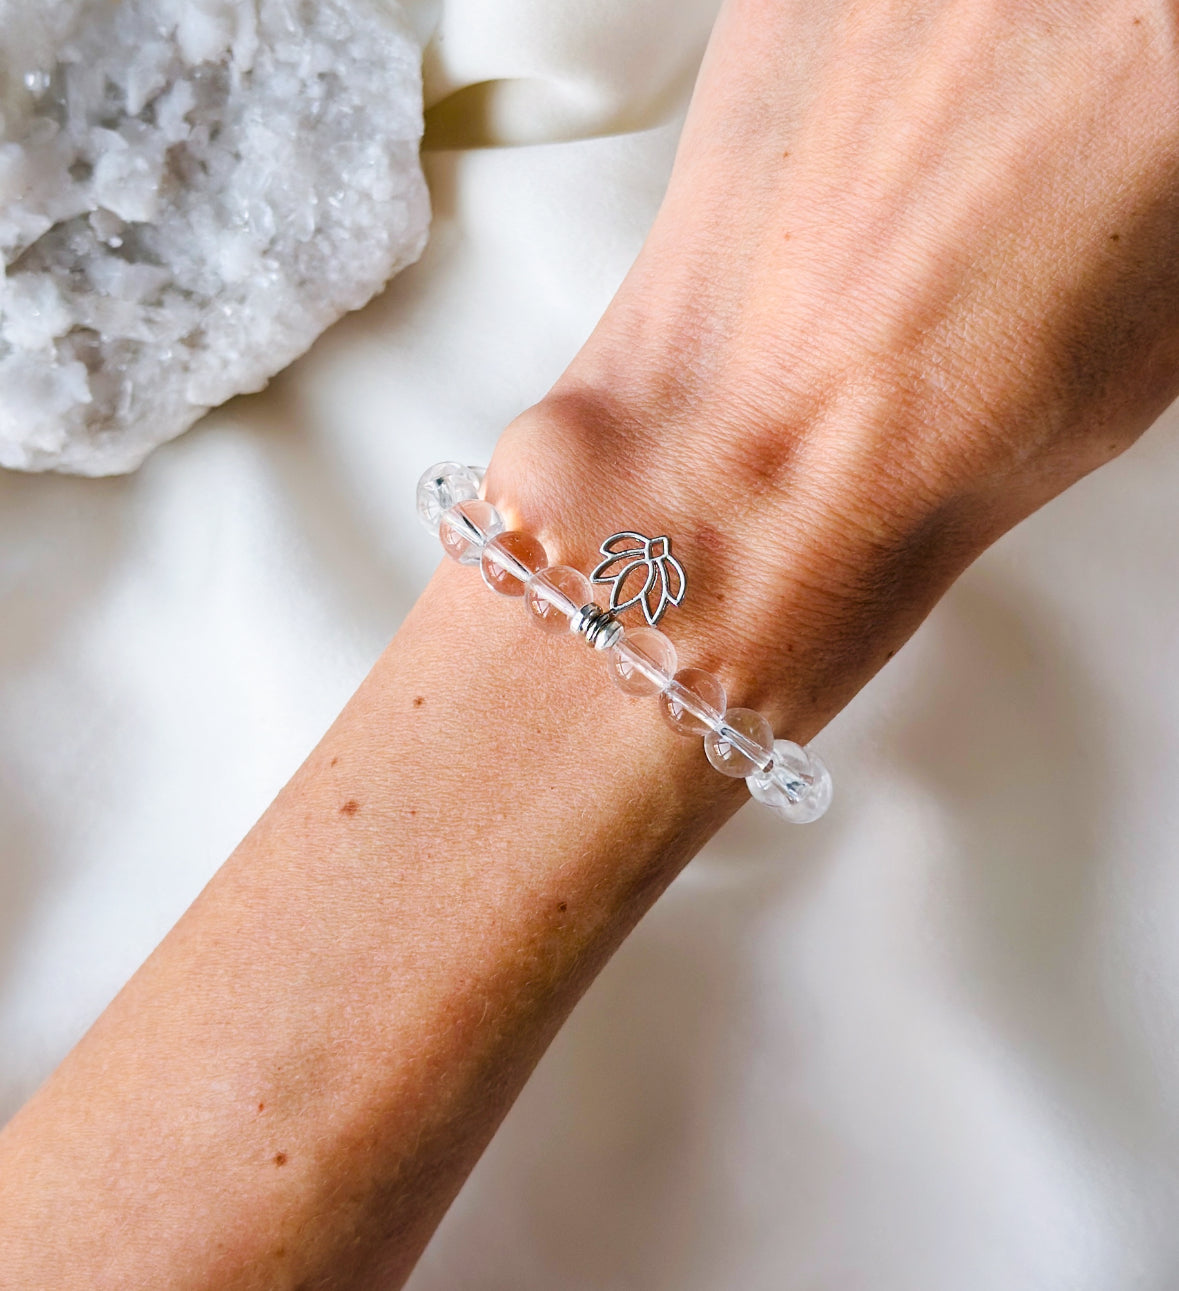  the "Luminescent Lotus Bracelet," a sublime fusion of Clear Quartz and a Lotus charm, 